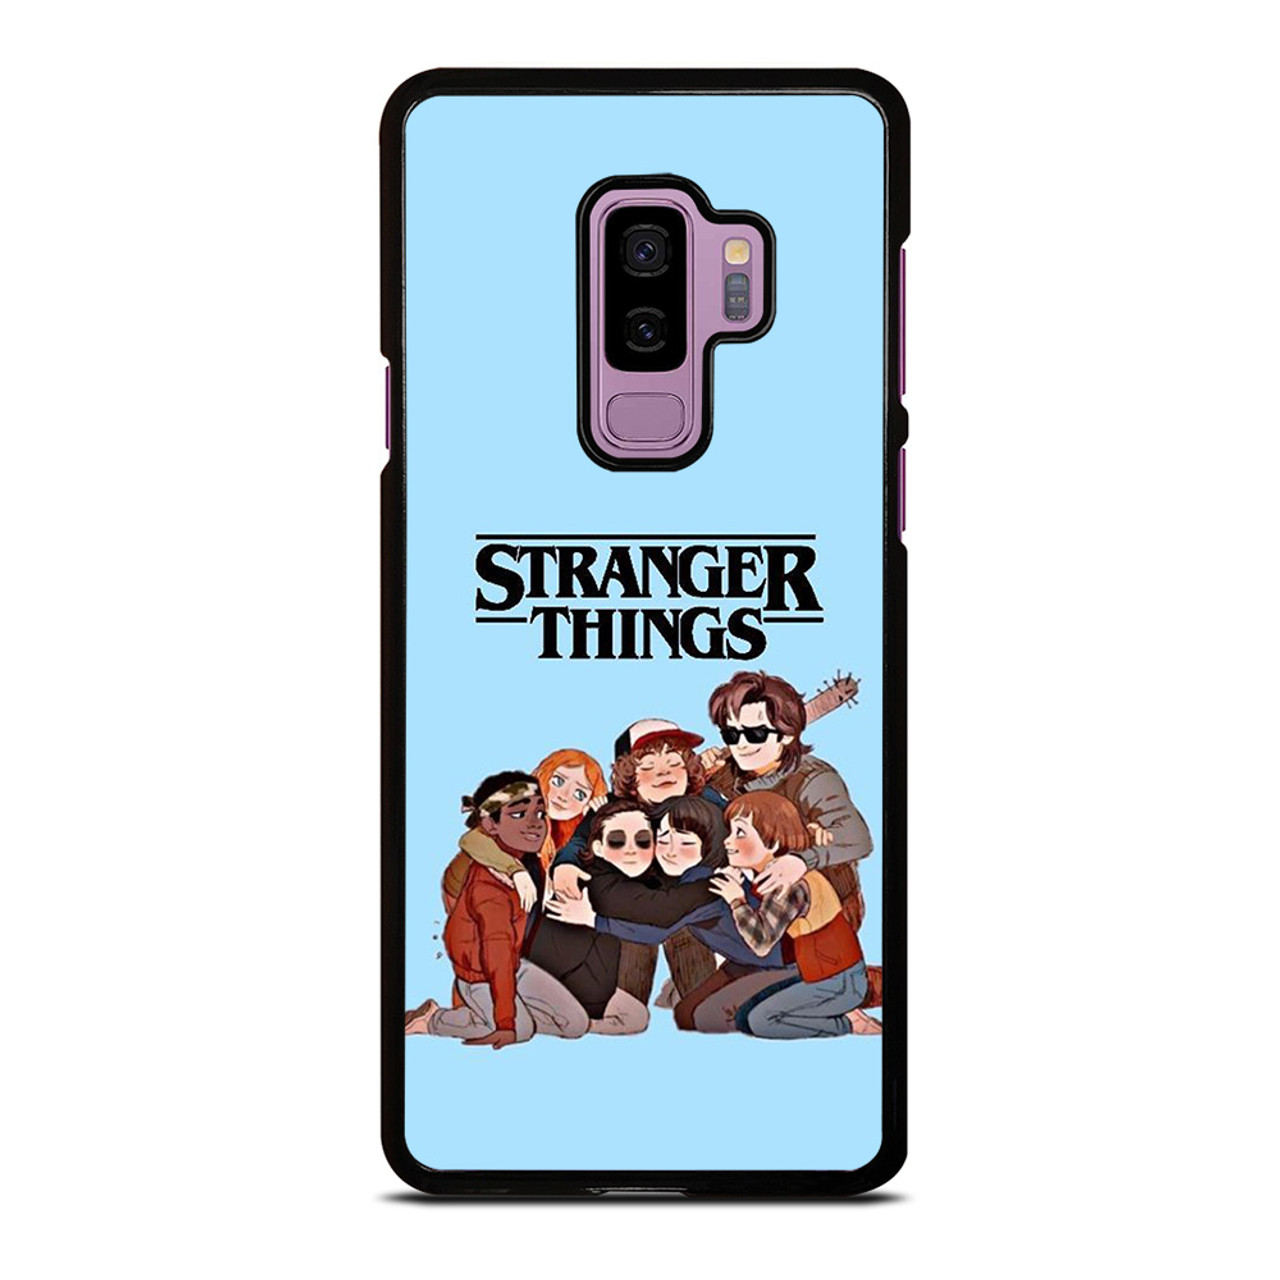 https://cdn11.bigcommerce.com/s-9chjulhvl5/images/stencil/1280x1280/products/289779/296097/STRANGER%20THINGS%20CARTOON%20CHARACTERS__13563.1675313671.jpg?c=1